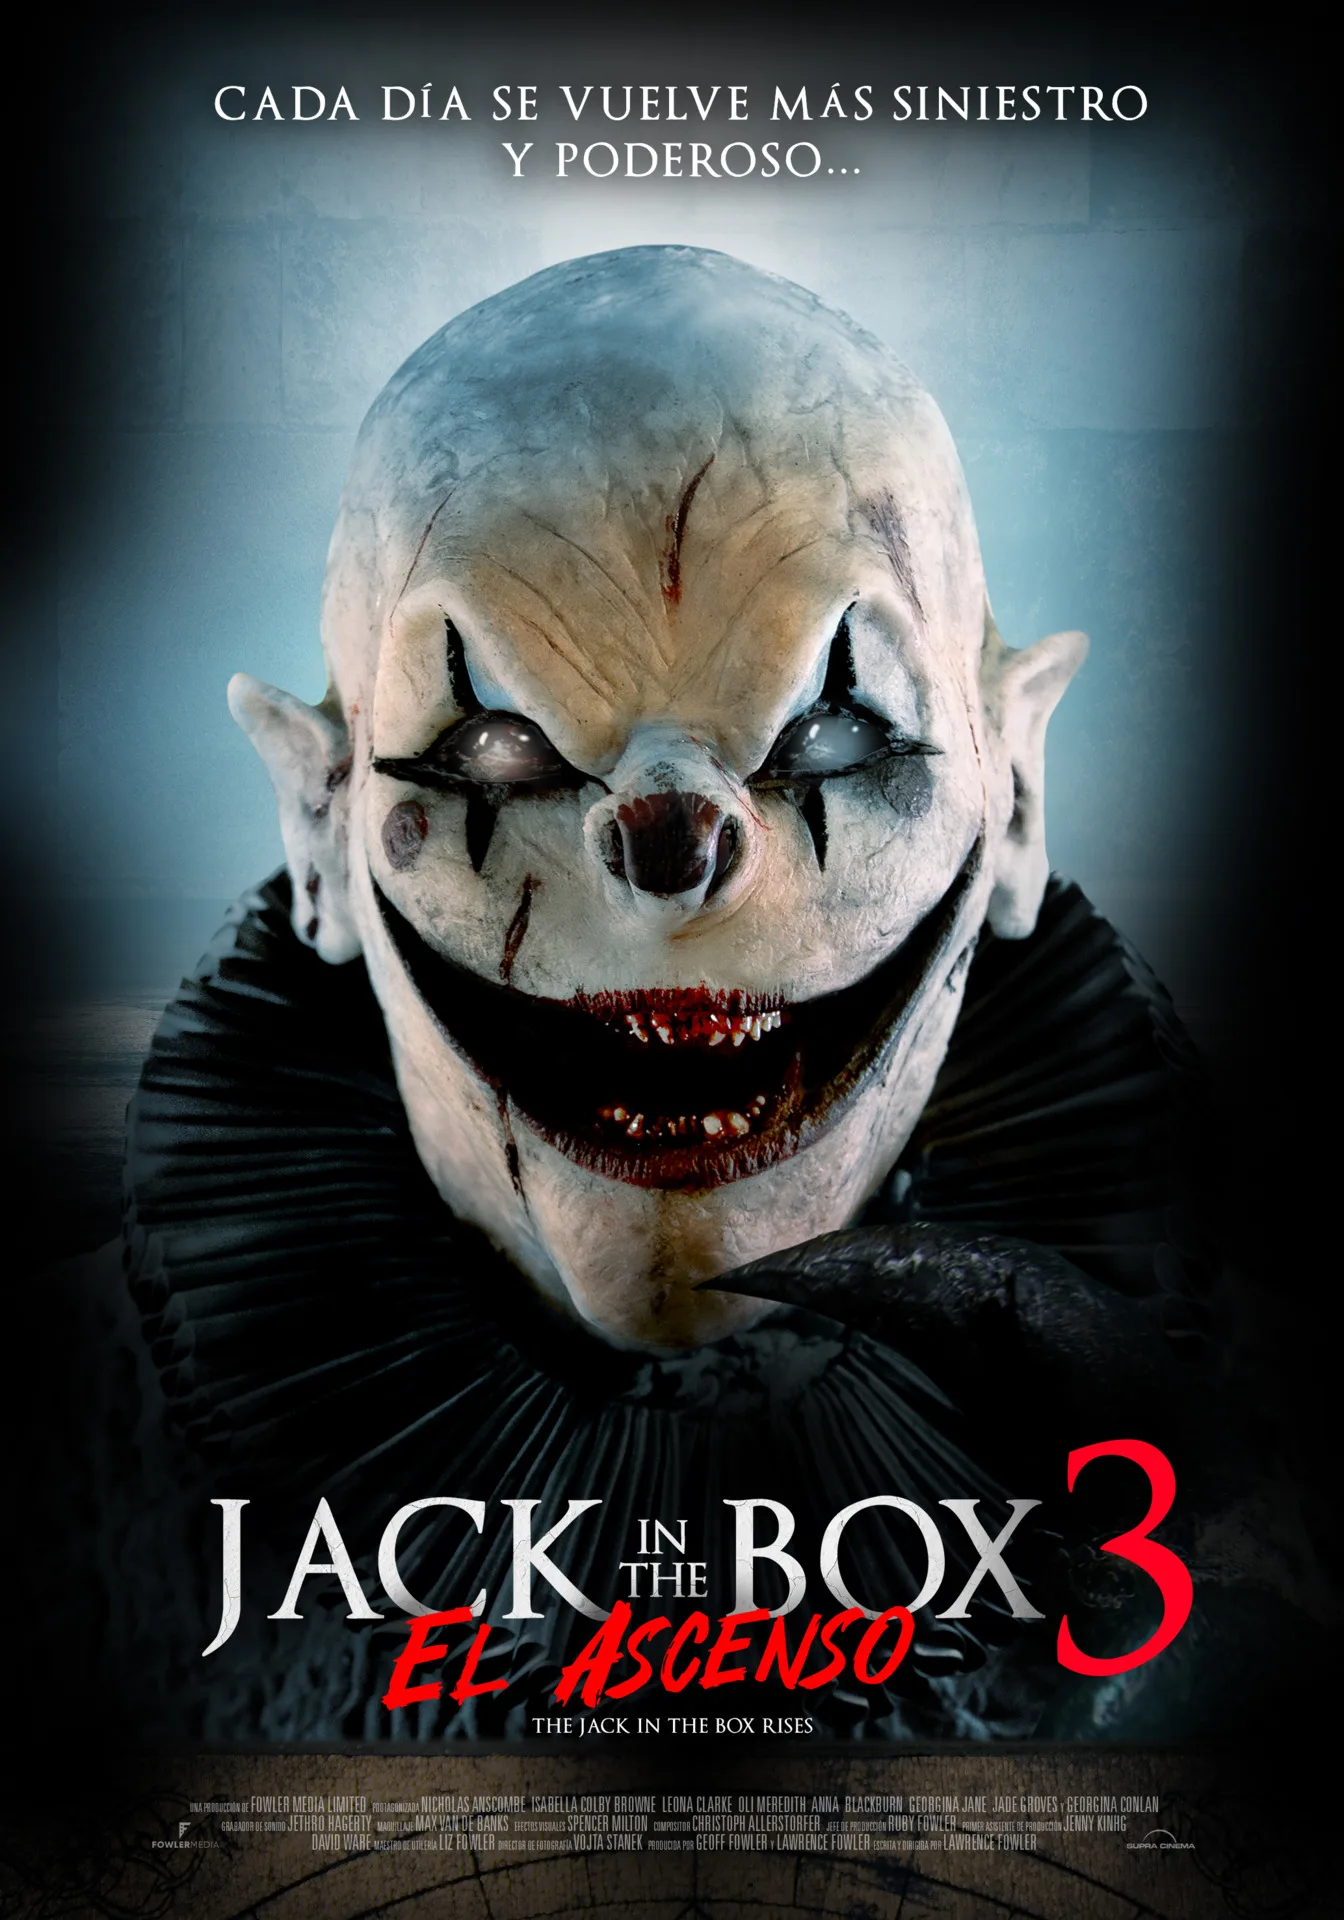 Jack in the box 3, poster.